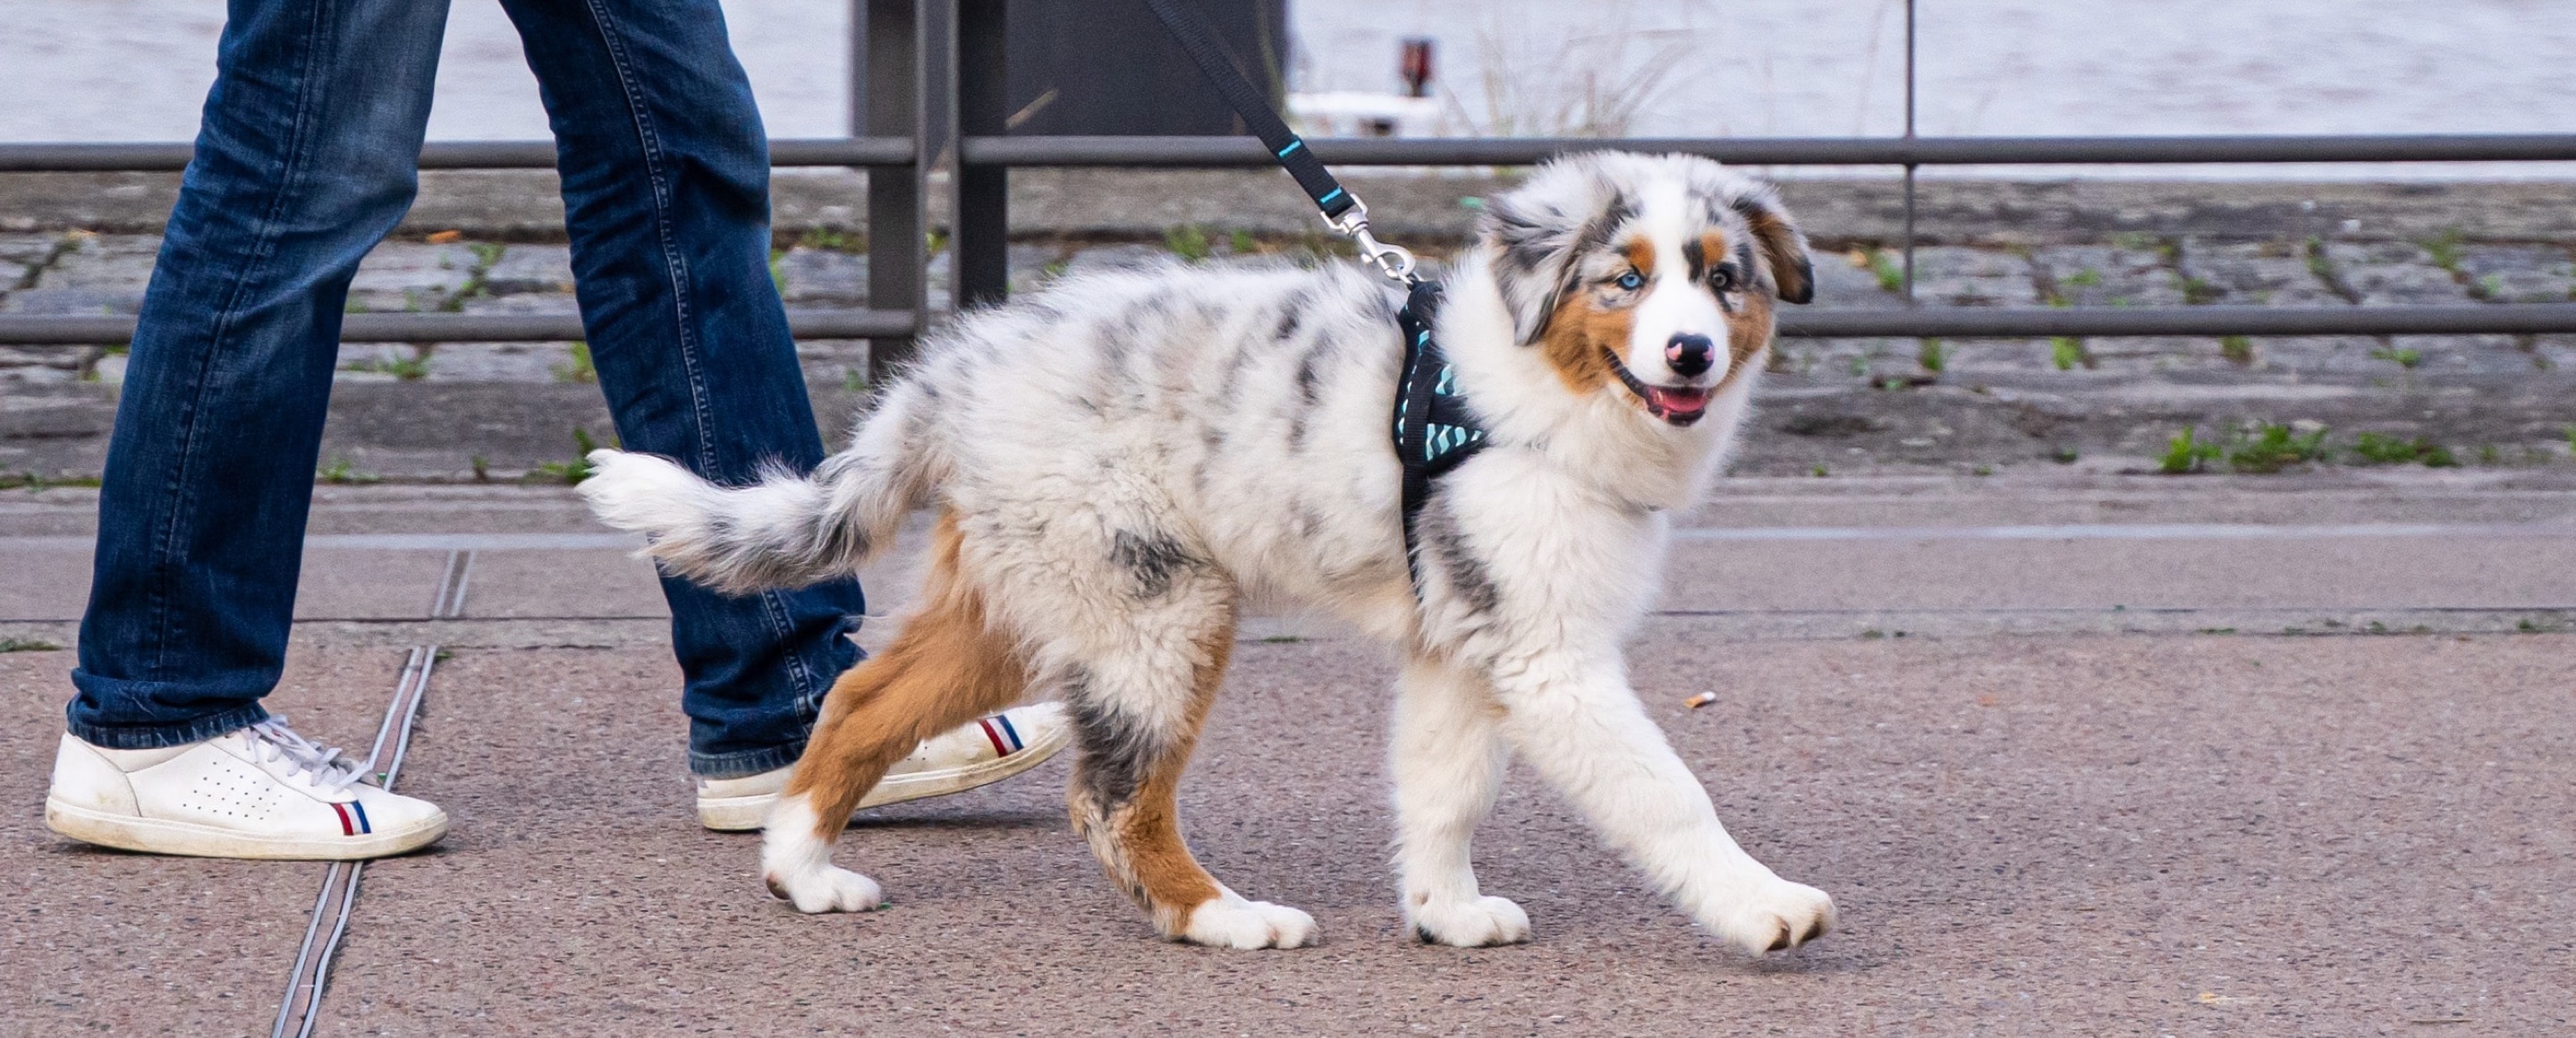 A fluffy, tricolor puppy with striking blue eyes looks back while taking a walk with its owner along a city street.